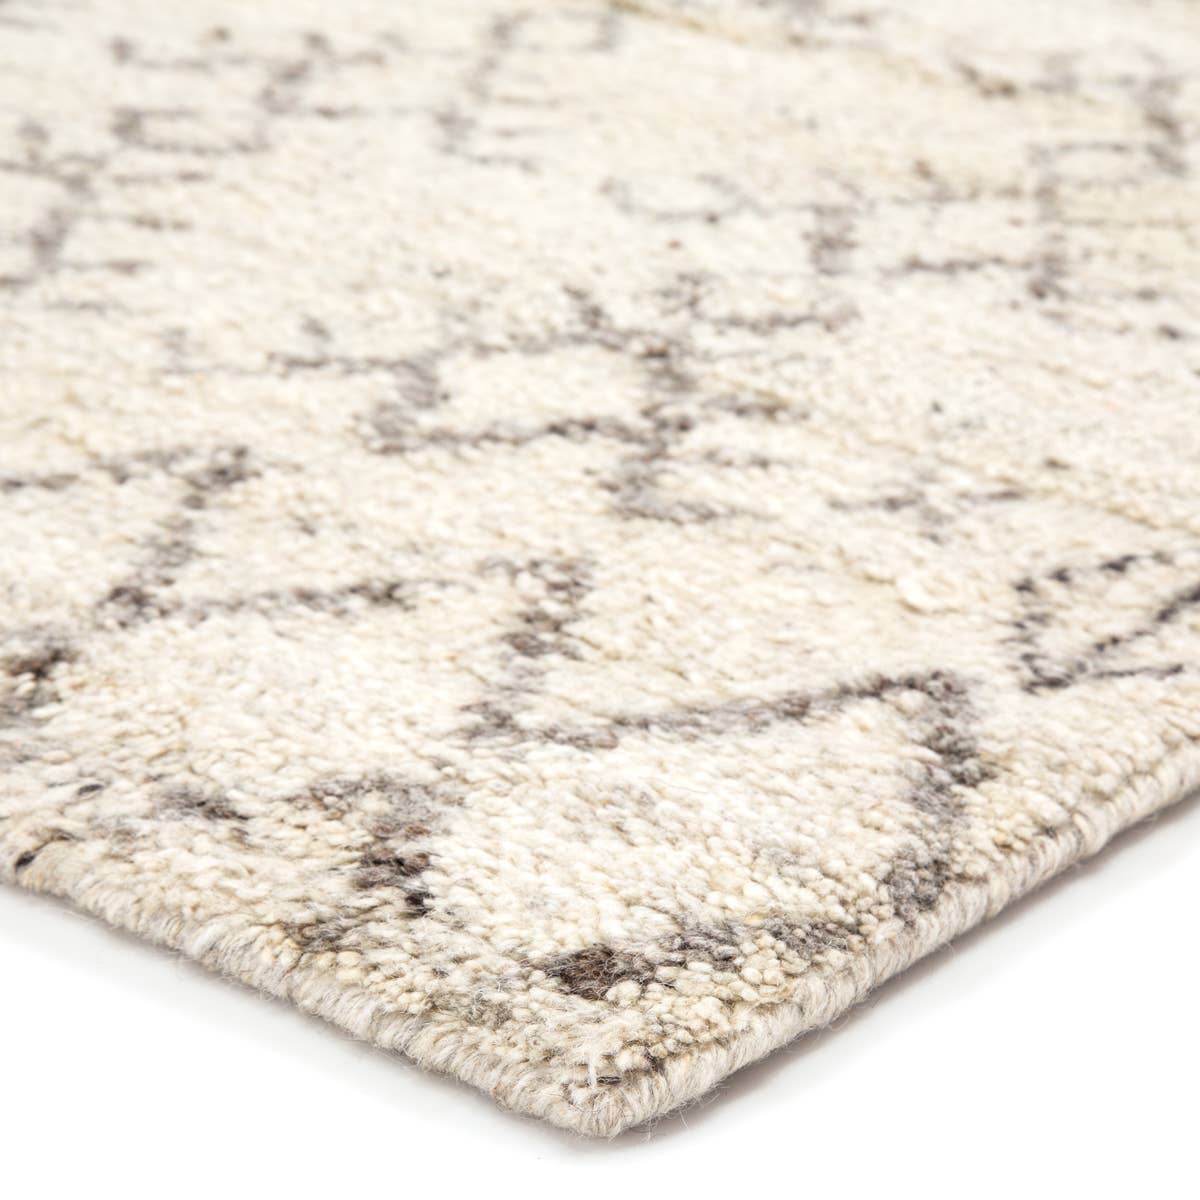 Zuri represents a nostalgic beauty in its literal meaning and in its physical representation of beauty and feel that has as much tactile presence as it does visual. Have beauty, peace, and calm as your foundation with the Zuri area rug. This rug would be perfect for a living room, bedroom, or hallway in the runner size.